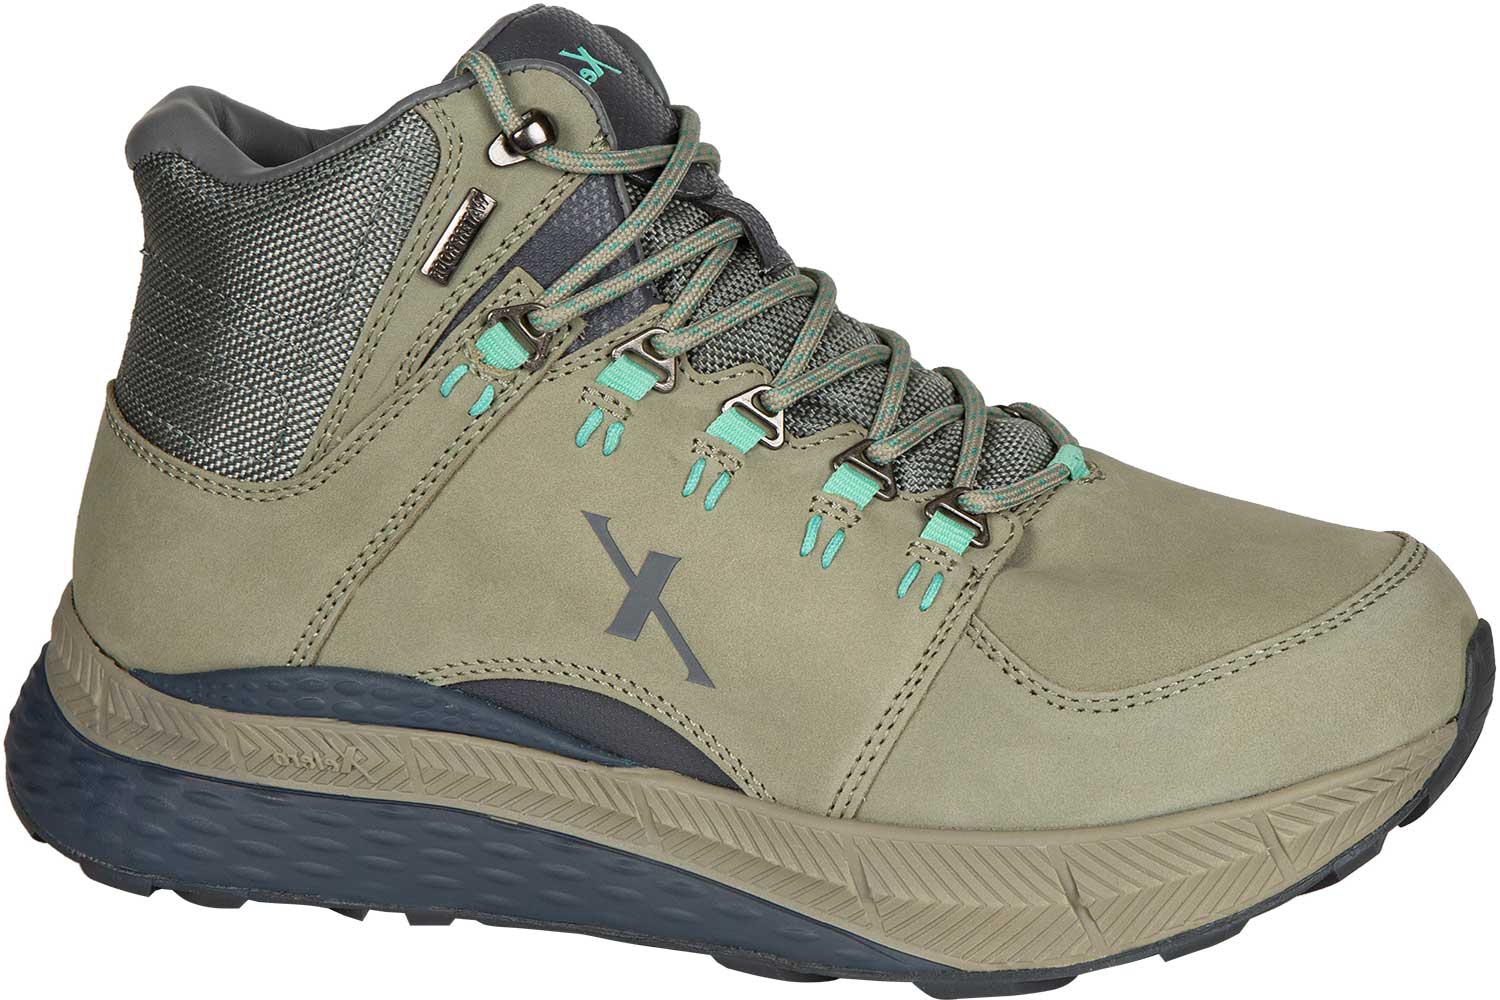 Xelero Shoes Steadfast X71252 Women's 4 Hiking Boot - Extra Depth For Orthotics - Wide